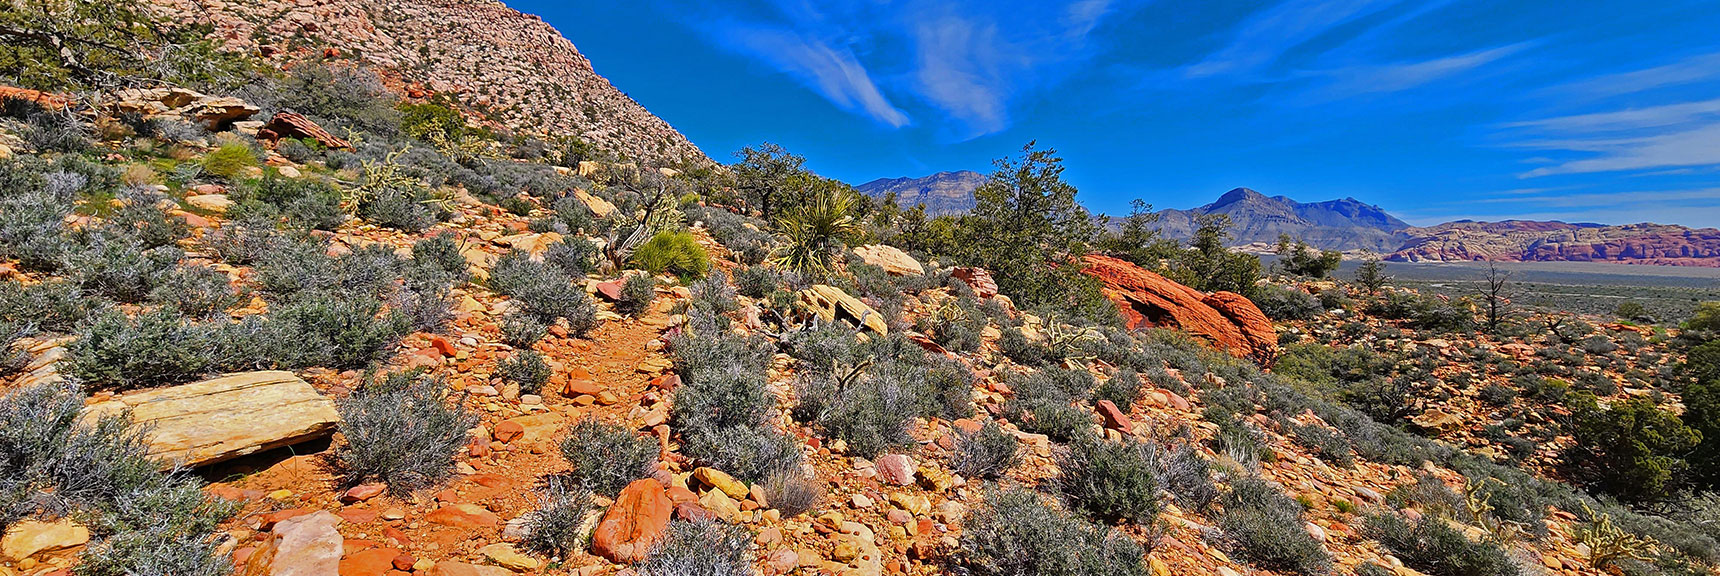 Continuing North on Dales Trail. Red Rock Reflects Composition of Bridge Mt. Above | Dales Trail | Red Rock Canyon National Conservation Area, Nevada | David Smith | LasVegasAreaTrails.com